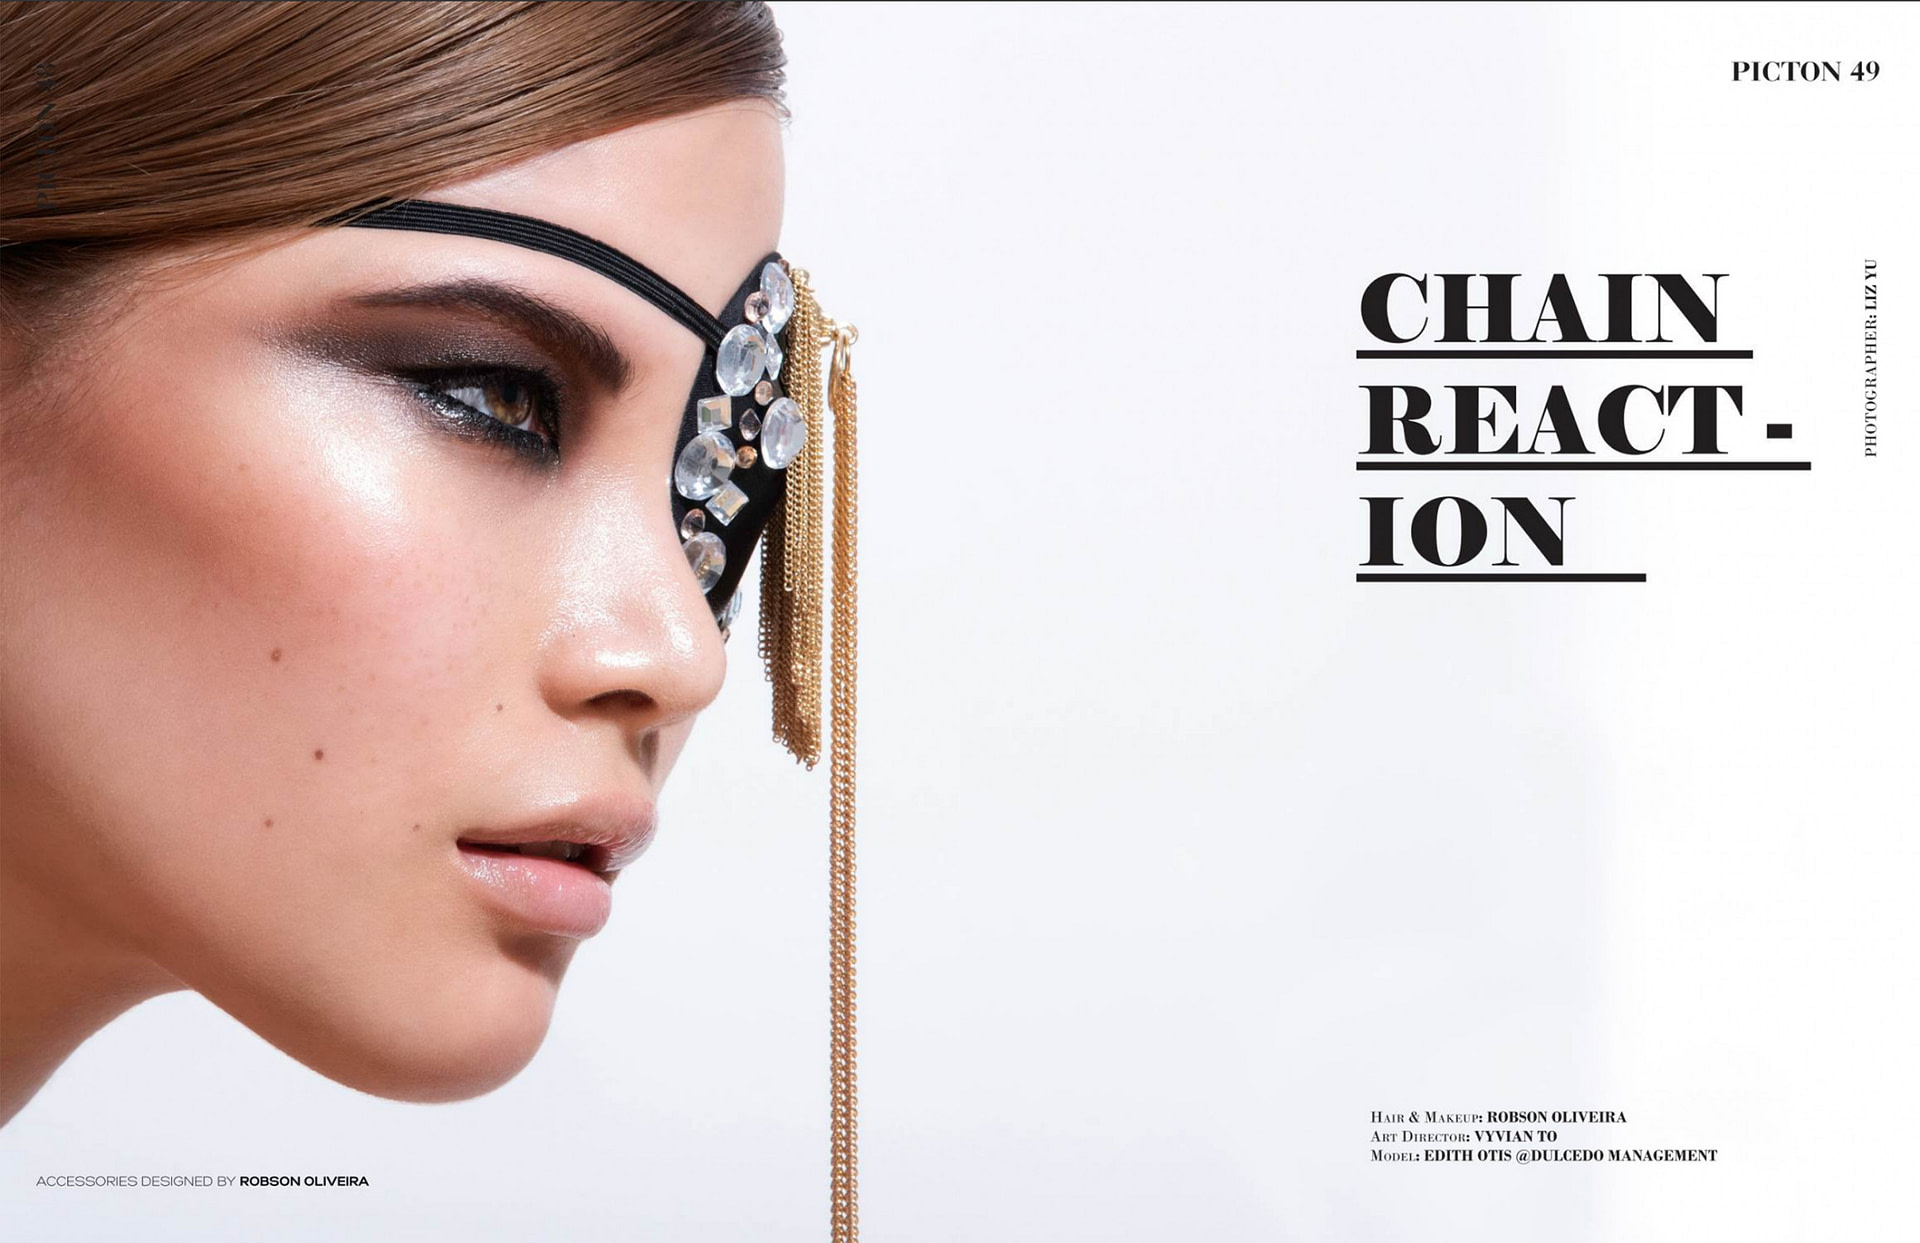 Chain Reaction: Edith for Picton Mag